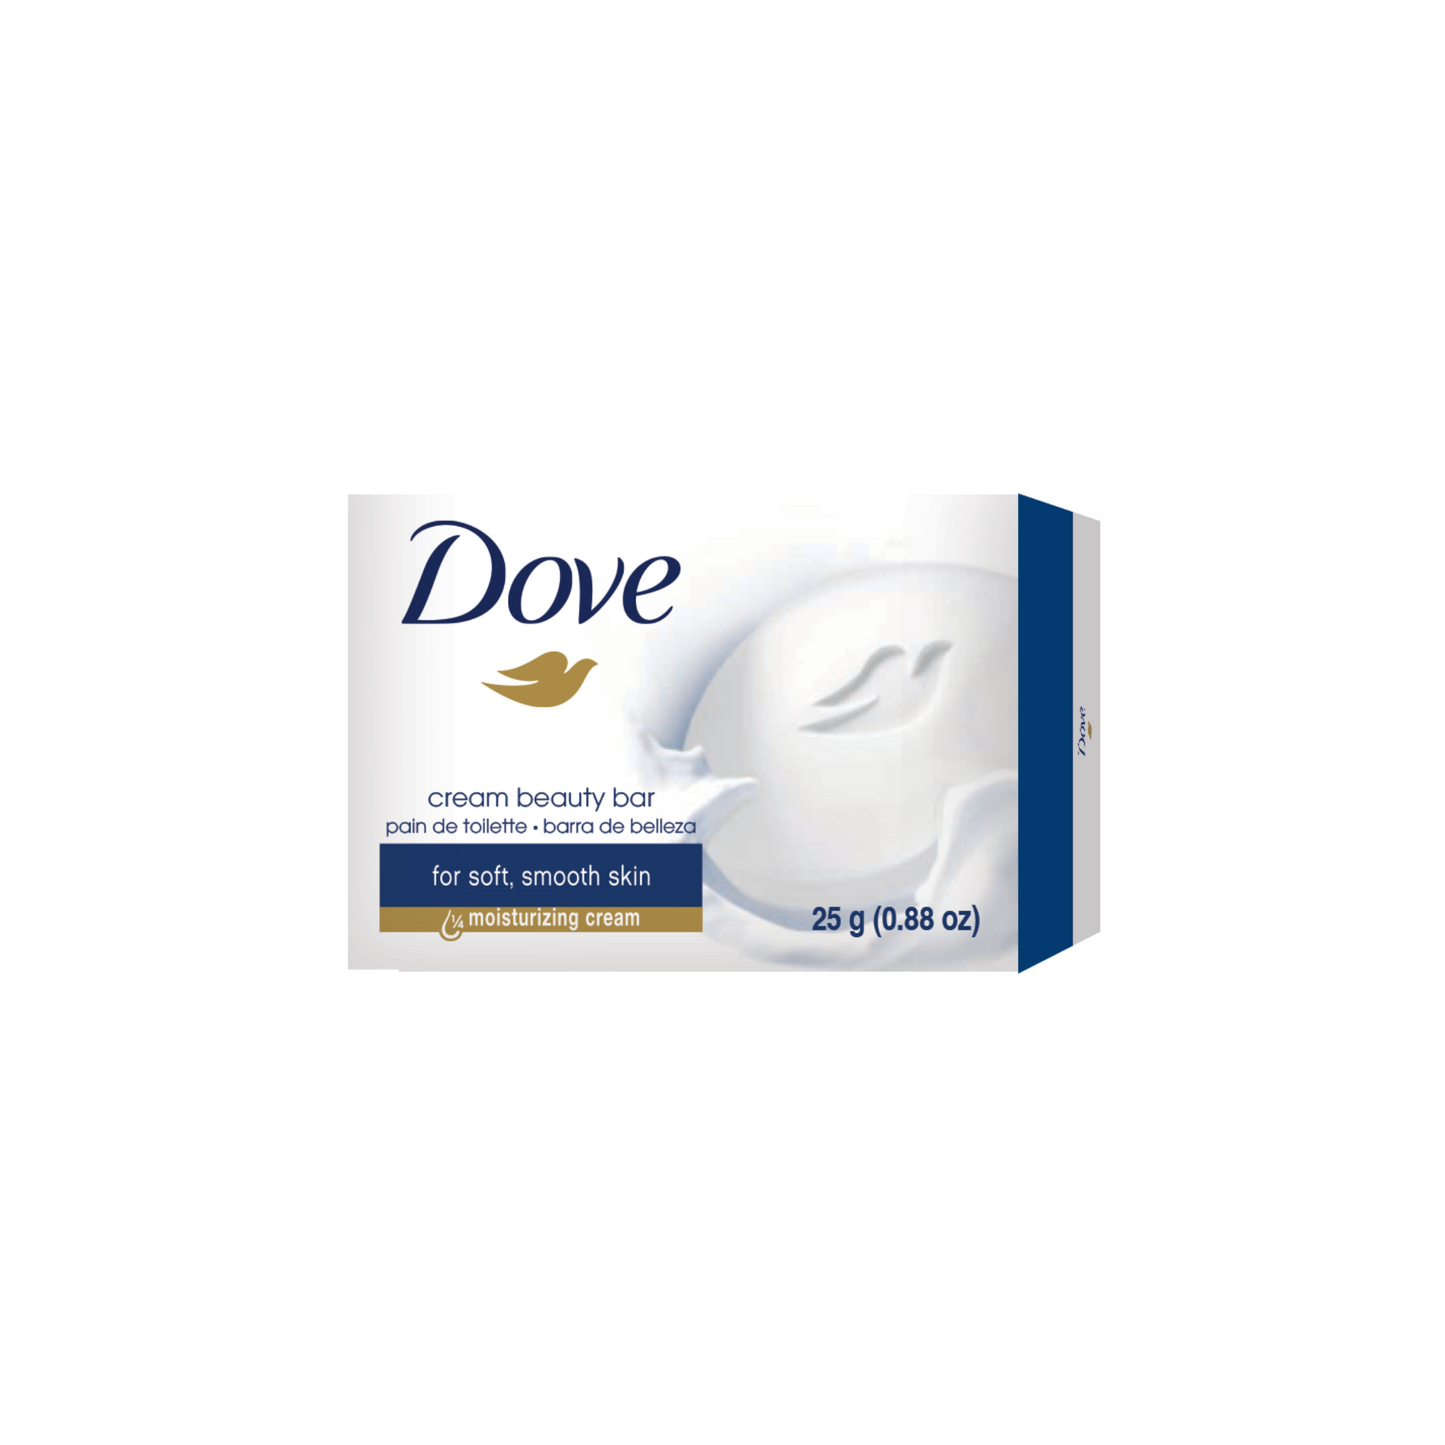 Nourish and Refresh: Compact Dove Beauty Bar - Dove Cream Beauty Bar Soap - 25g by Canadian Hotel Supplies